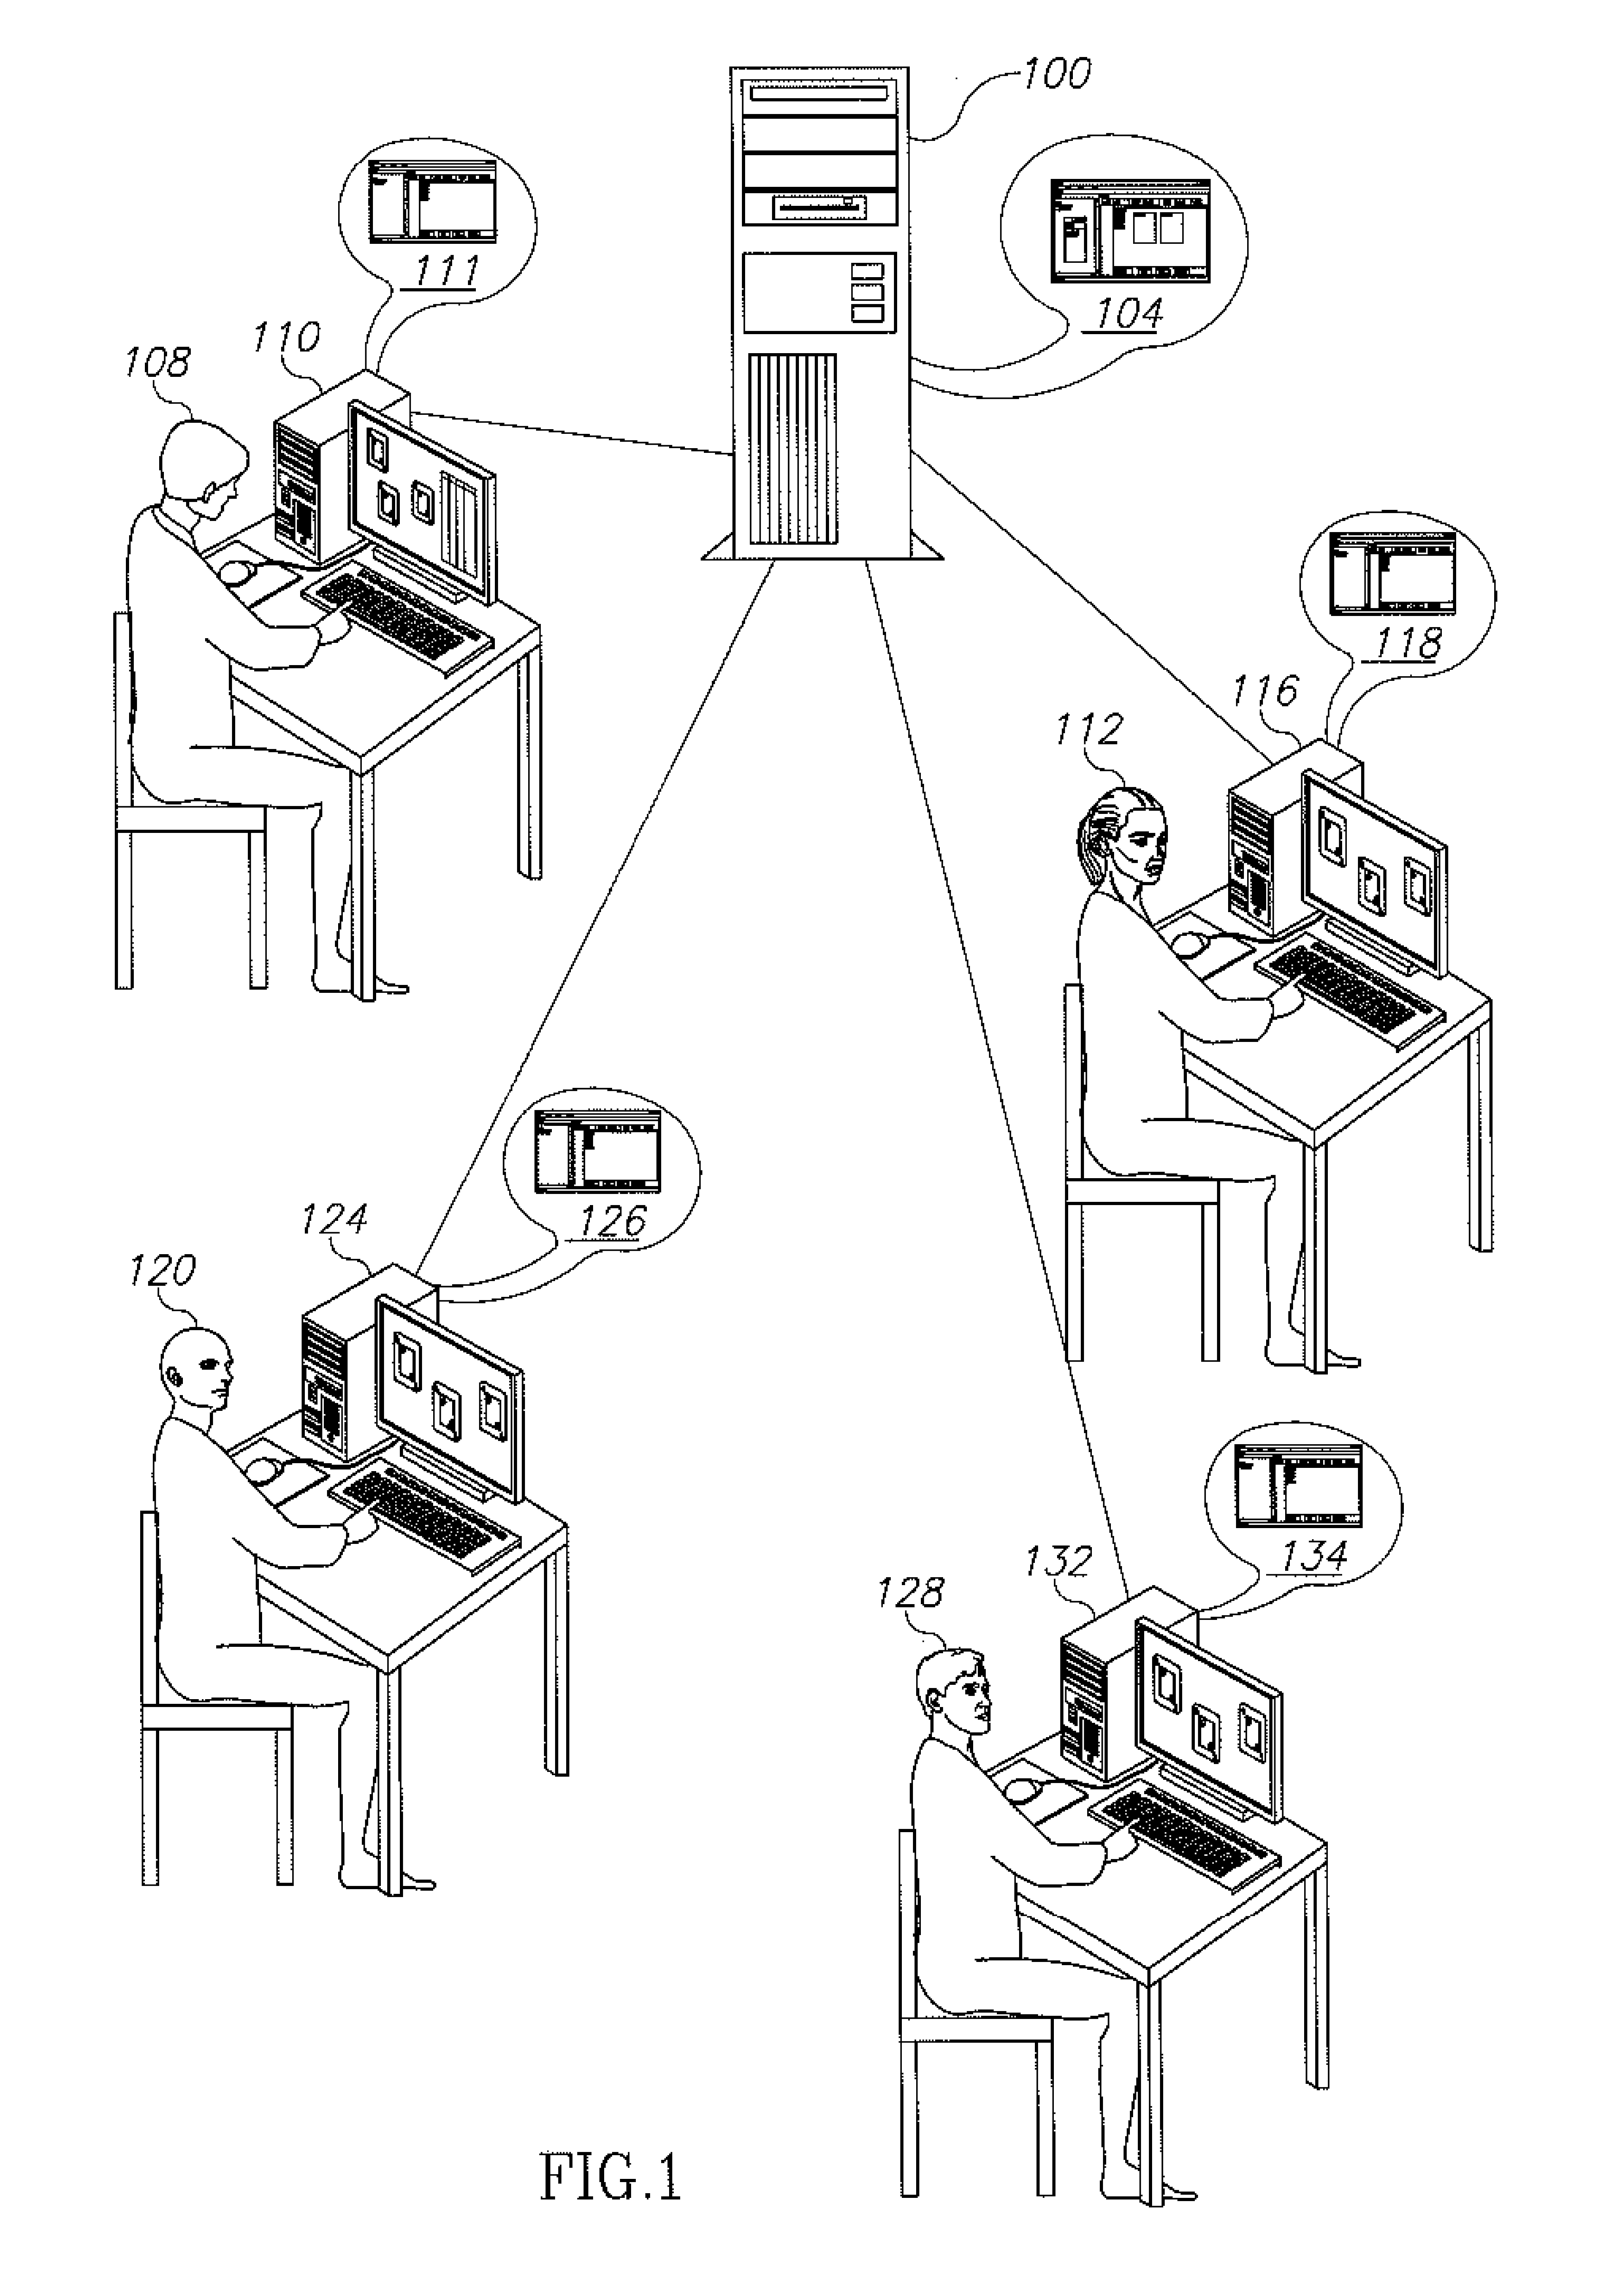 Method and apparatus for preventing collusions in online games